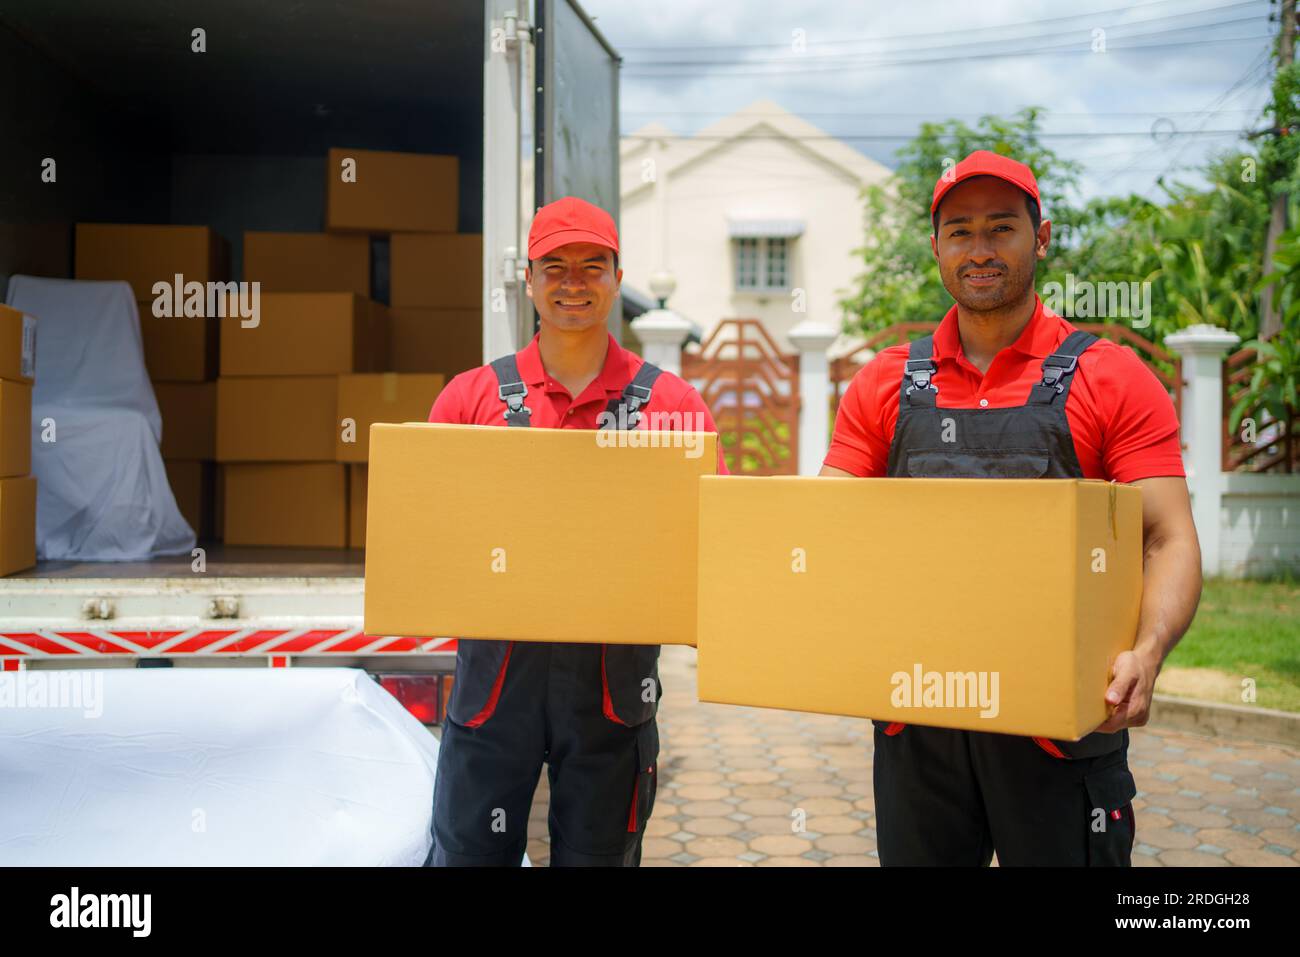 The House Removals company employees stand proudly behind the truck, boxes in hand, wearing smiles that reflect their commitment to a successful move. Stock Photo